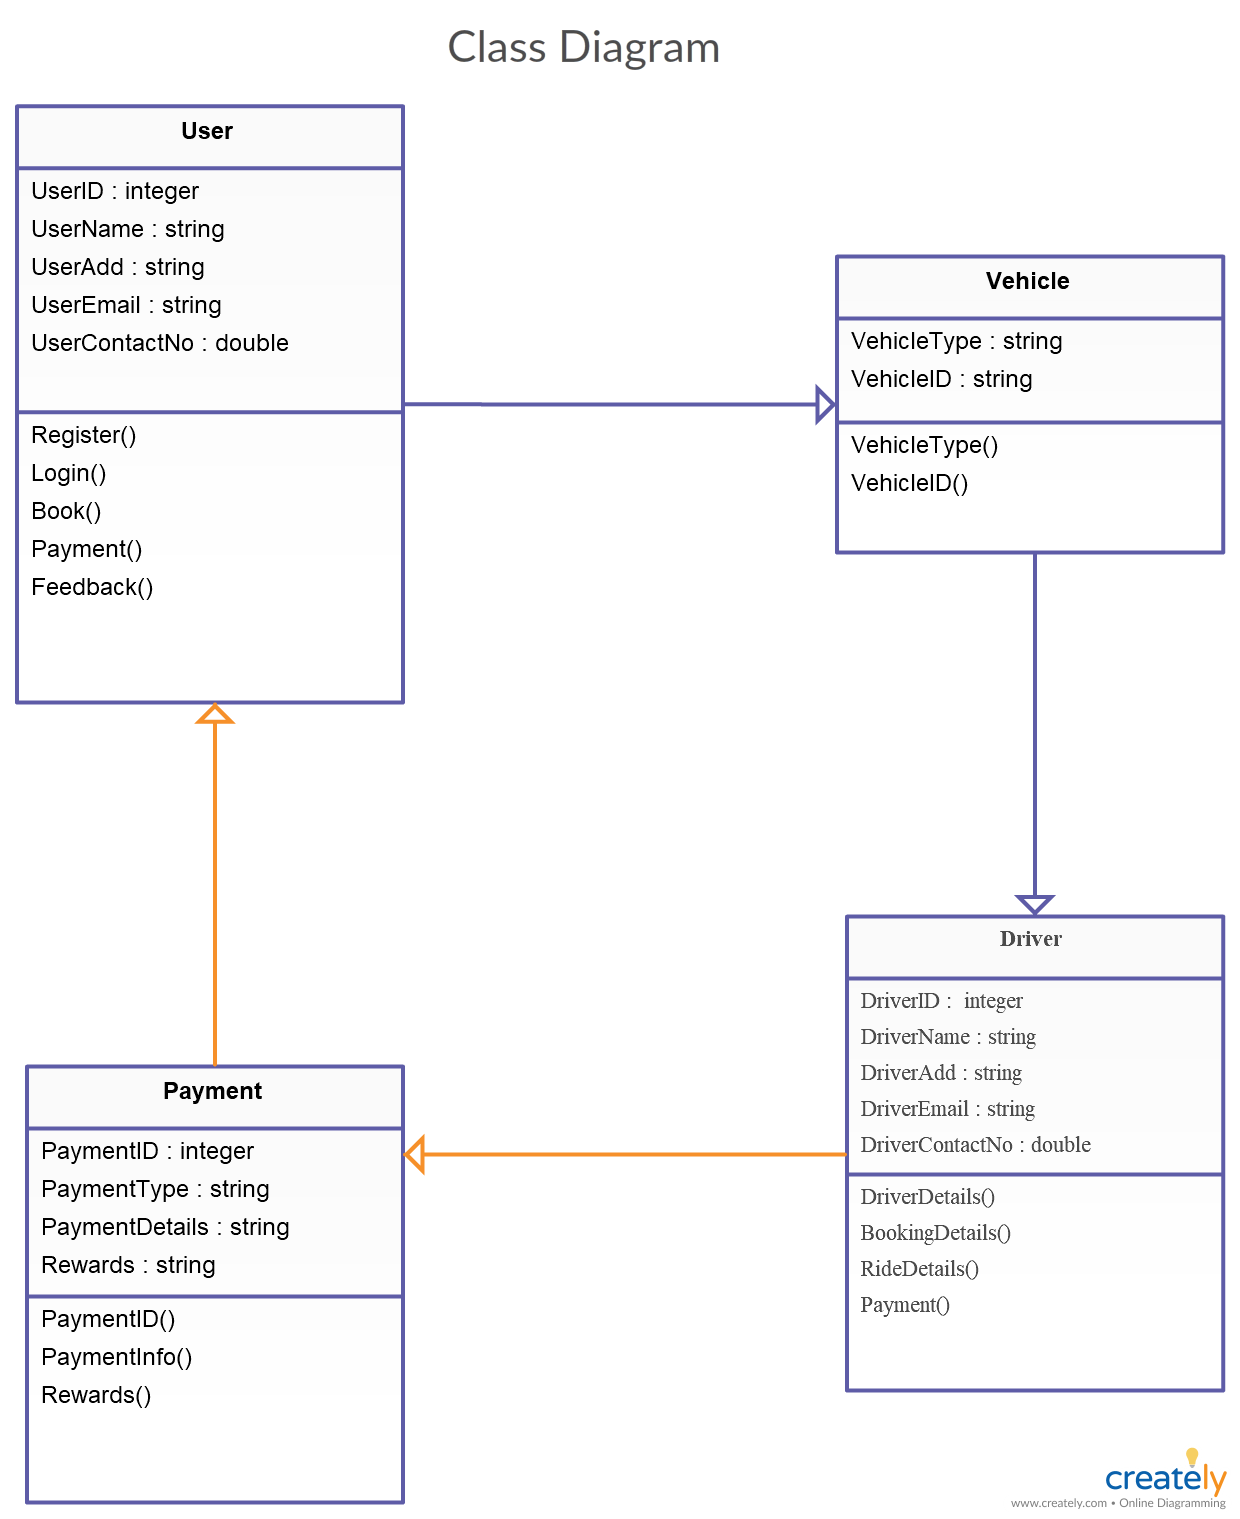 Uber Class Diagram - Class Diagram For Uber System To